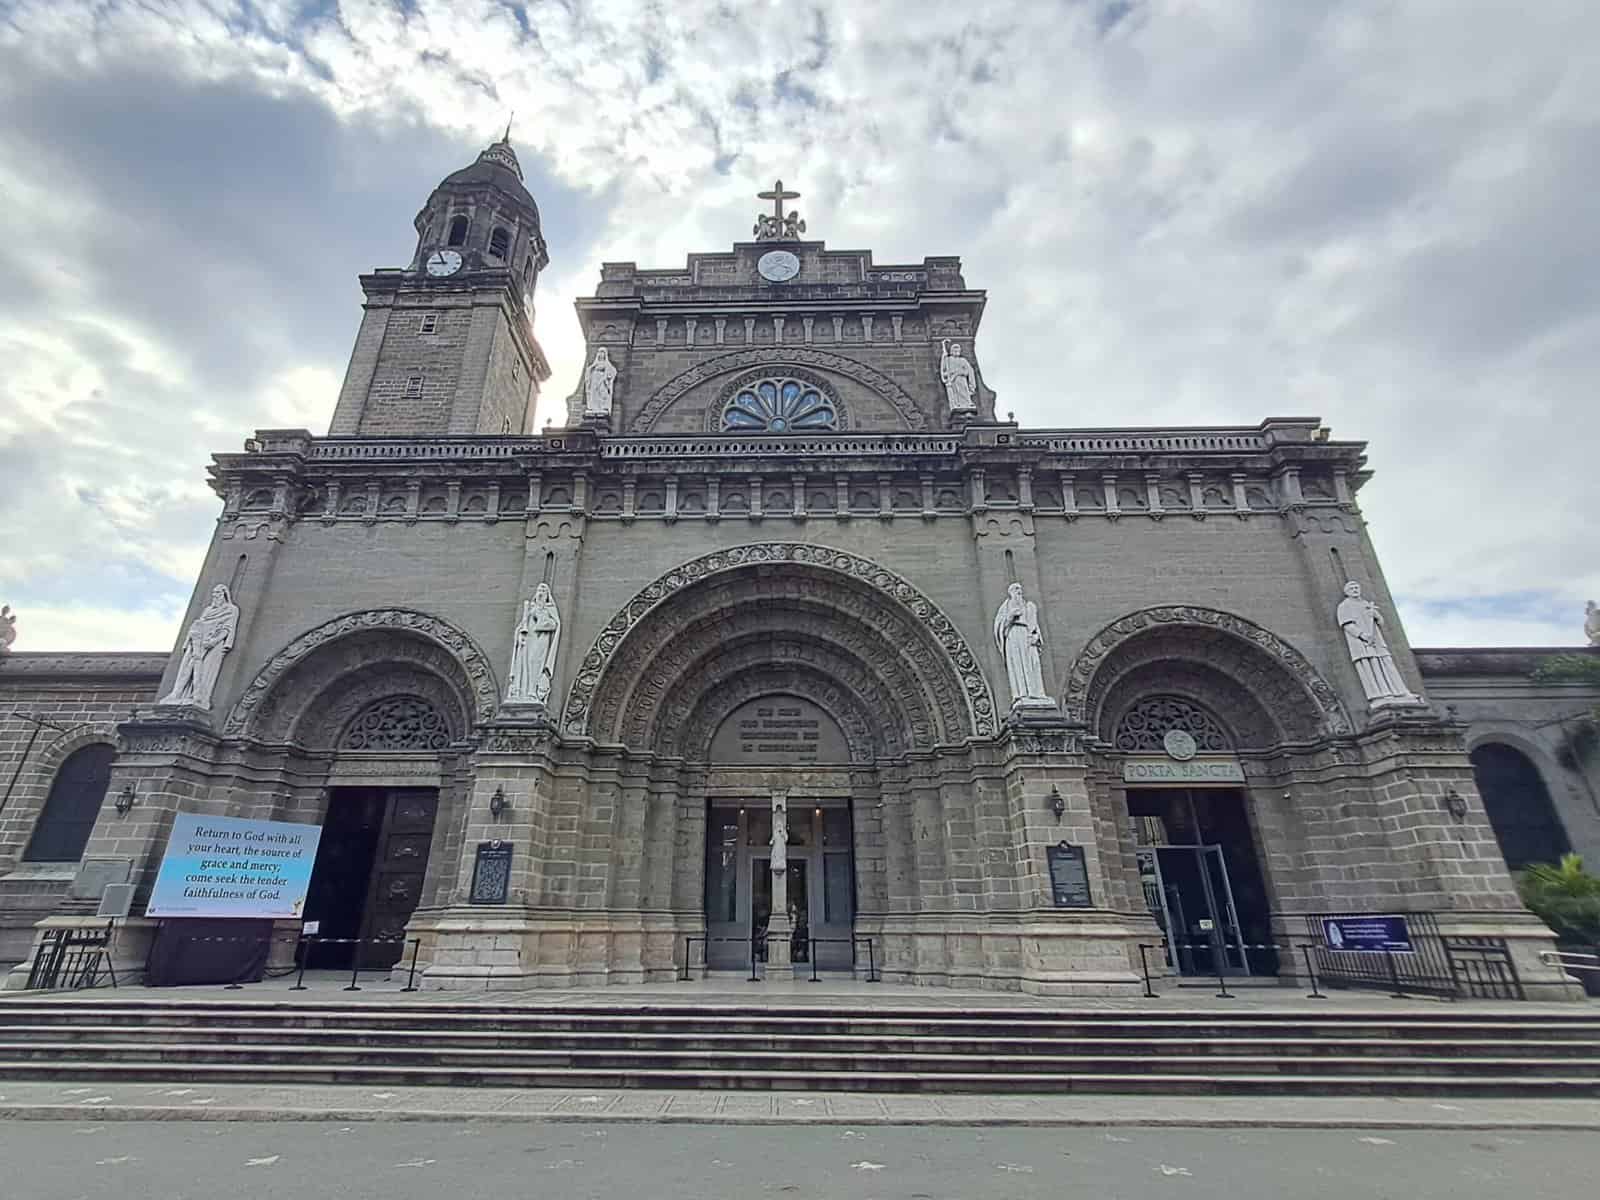 Manila Cathedral is shown from the street.